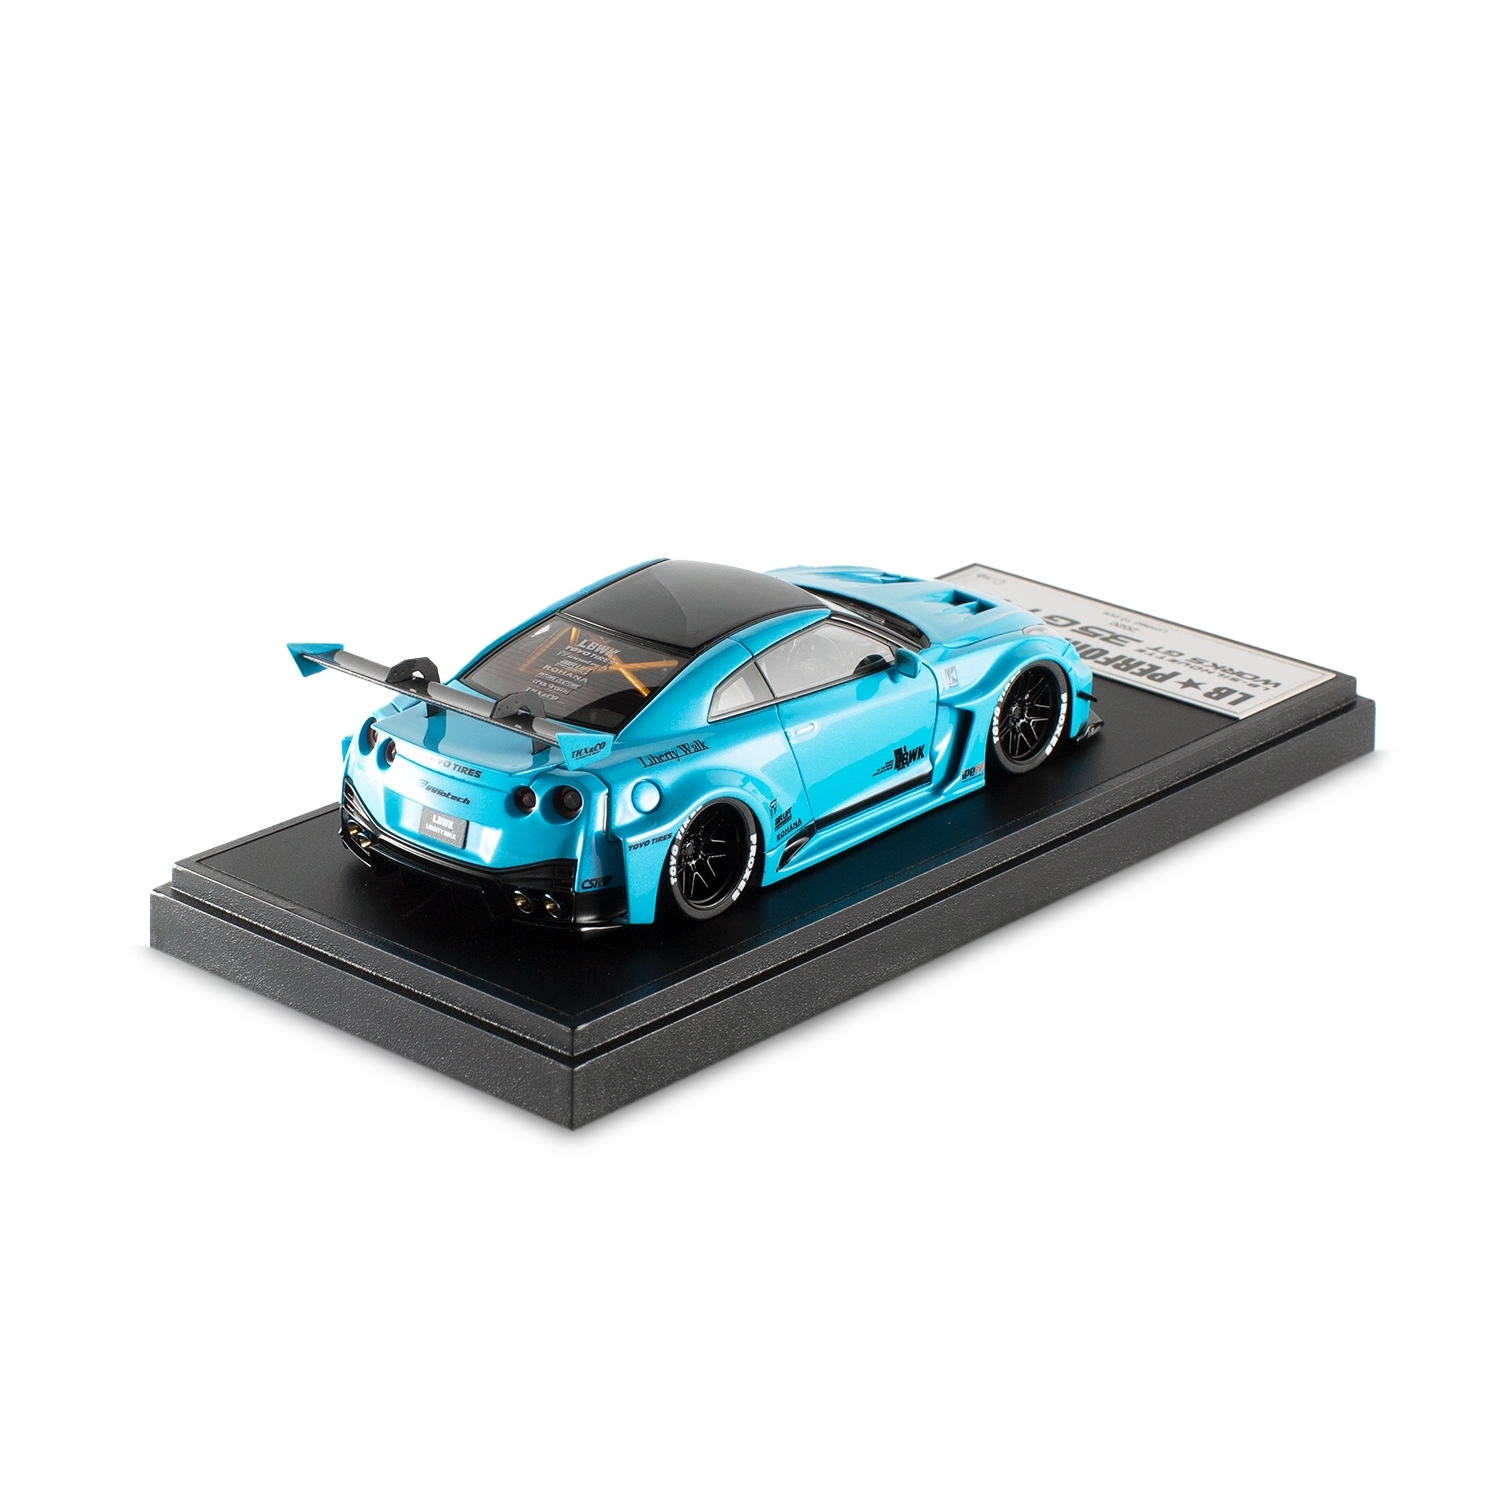 Make Up 1/43 LB-Silhouette WORKS GT 35GT-RR GT Wing ver. Pearl Light Blue -  LB-ONLINE STORE